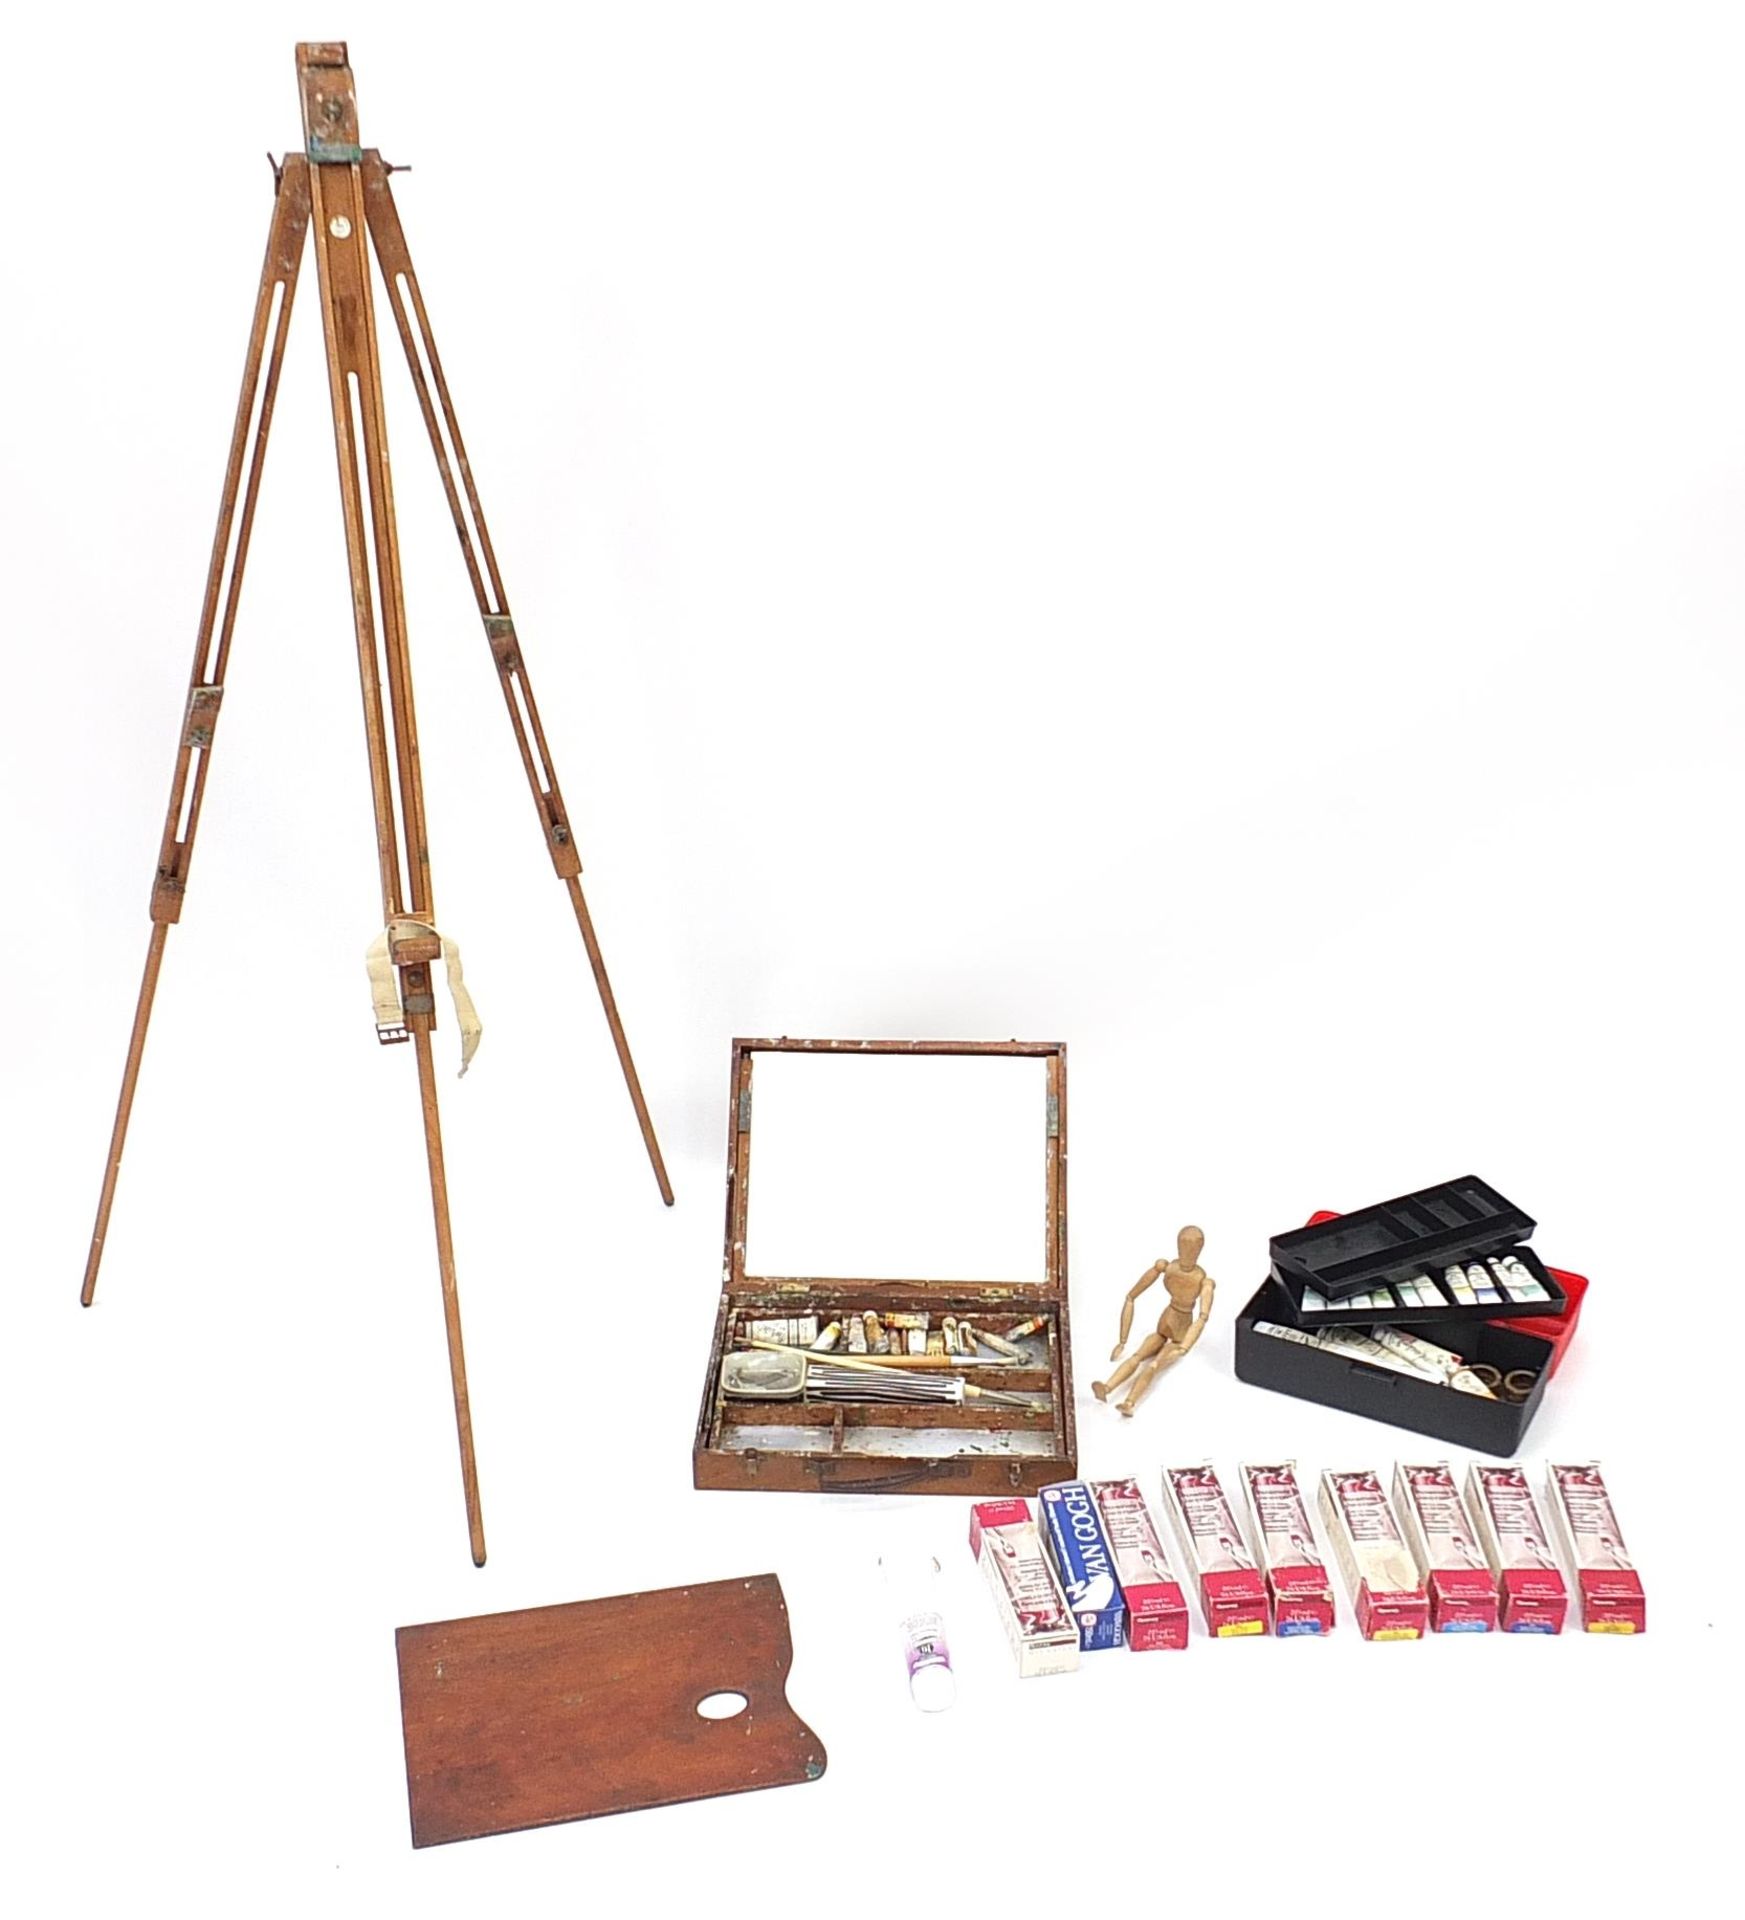 Artist's paints and equipment including a Winsor & Newton easel, paints, palette and jointed mannequ